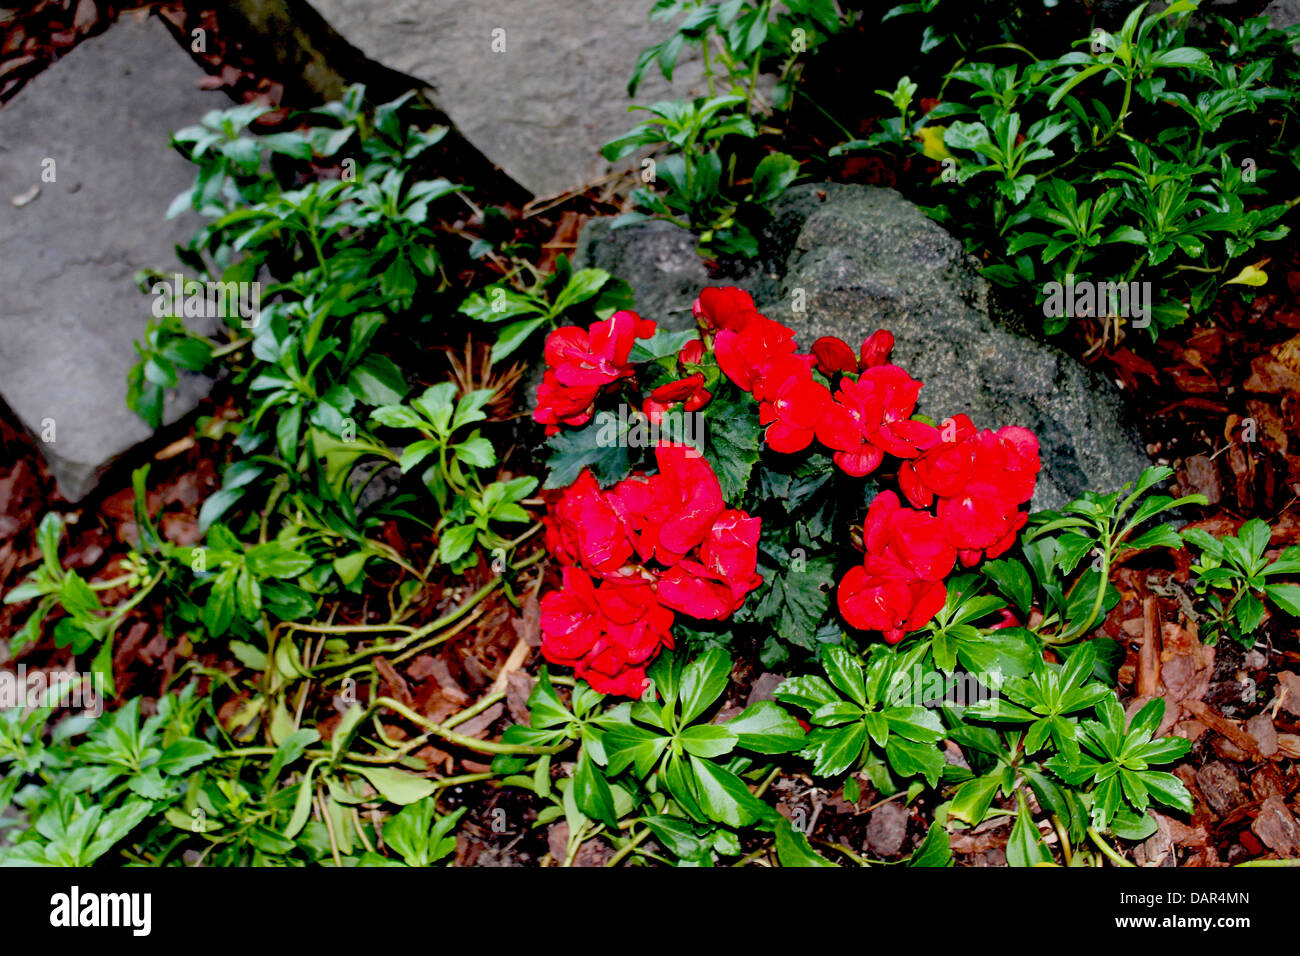 The Begonia flower is a subtropical and tropical perennial plant. Stock Photo